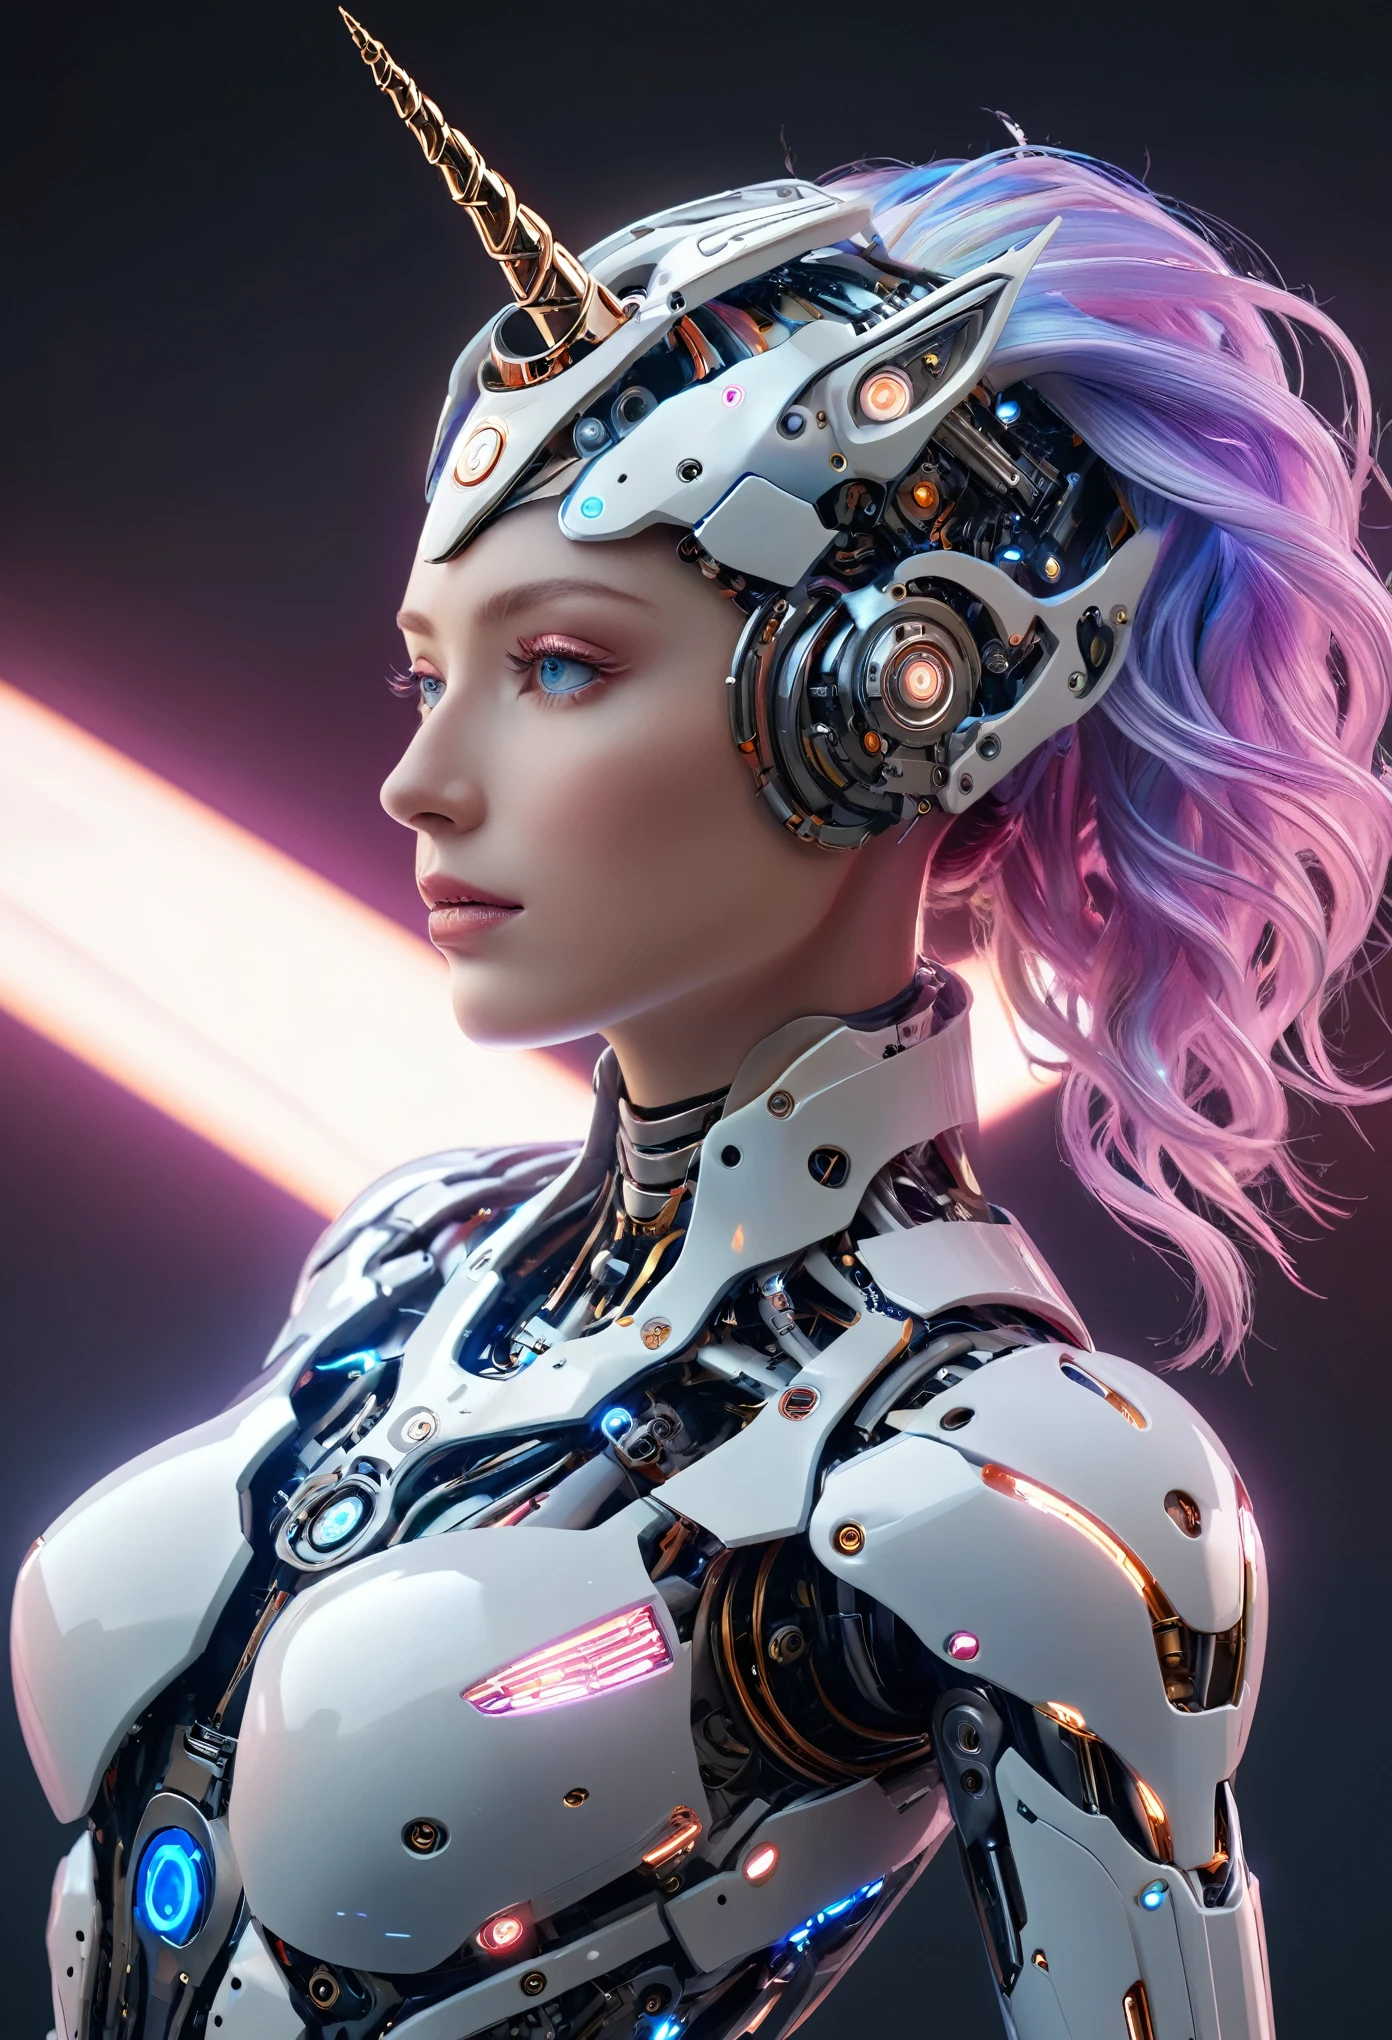 (best quality,4k,highres,masterpiece:1.2),ultra-detailed,(realistic,photorealistic:1.37), A breathtakingly beautiful female humanoid unicorn cyborg android, (a shimmering unicorn horn:1.8), porcelain skin, striking eyes, delicate features, futuristic sci-fi, intricate mechanical parts, glowing cybernetic implants, elegant and graceful pose, hyper-realistic, photorealistic, masterpiece, 8k, ultra-detailed, cinematic lighting, dramatic shadows, vivid colors, highly saturated, neon highlights, glowing energy fields, complex machinery, sleek and modern, cutting-edge technology, advanced AI, seamless integration of organic and mechanical elements